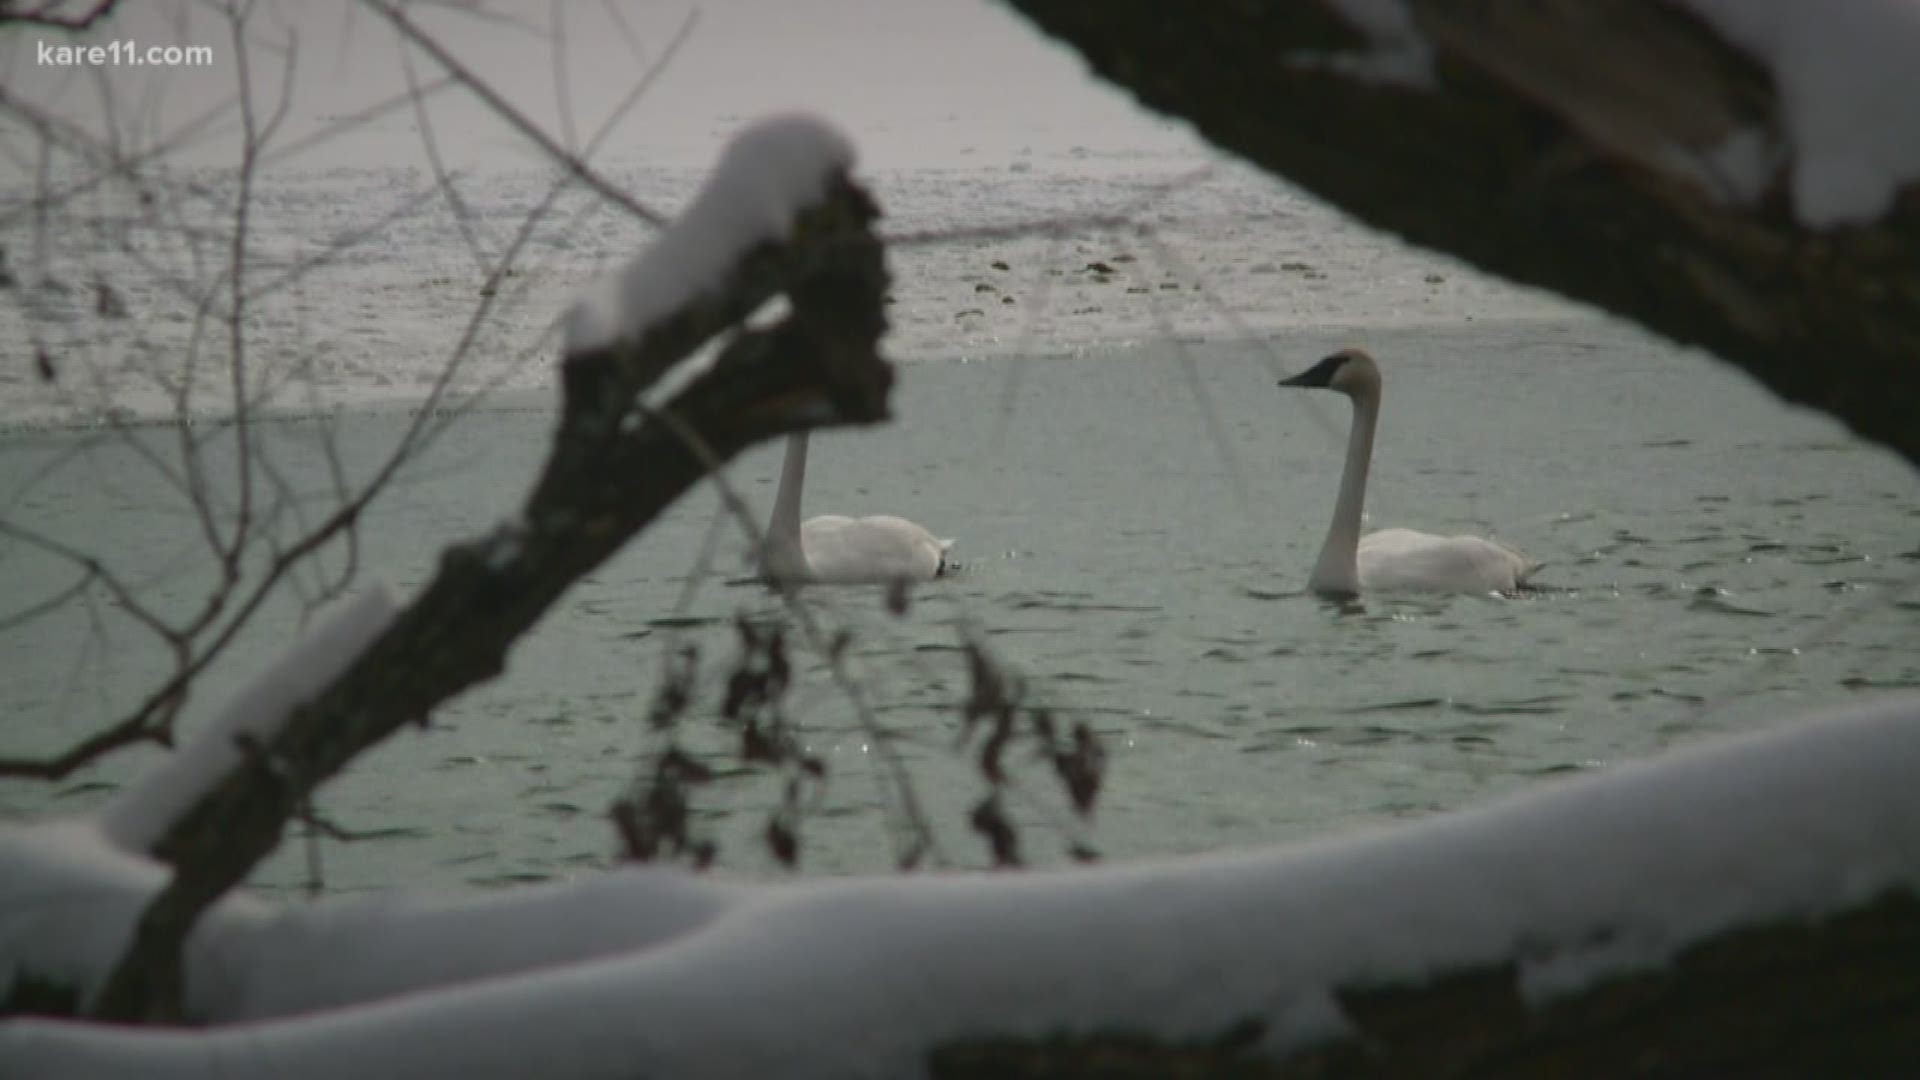 The Vadnais Lake Area Water Management Organization has reported more than a dozen trumpeter swan deaths since last year.